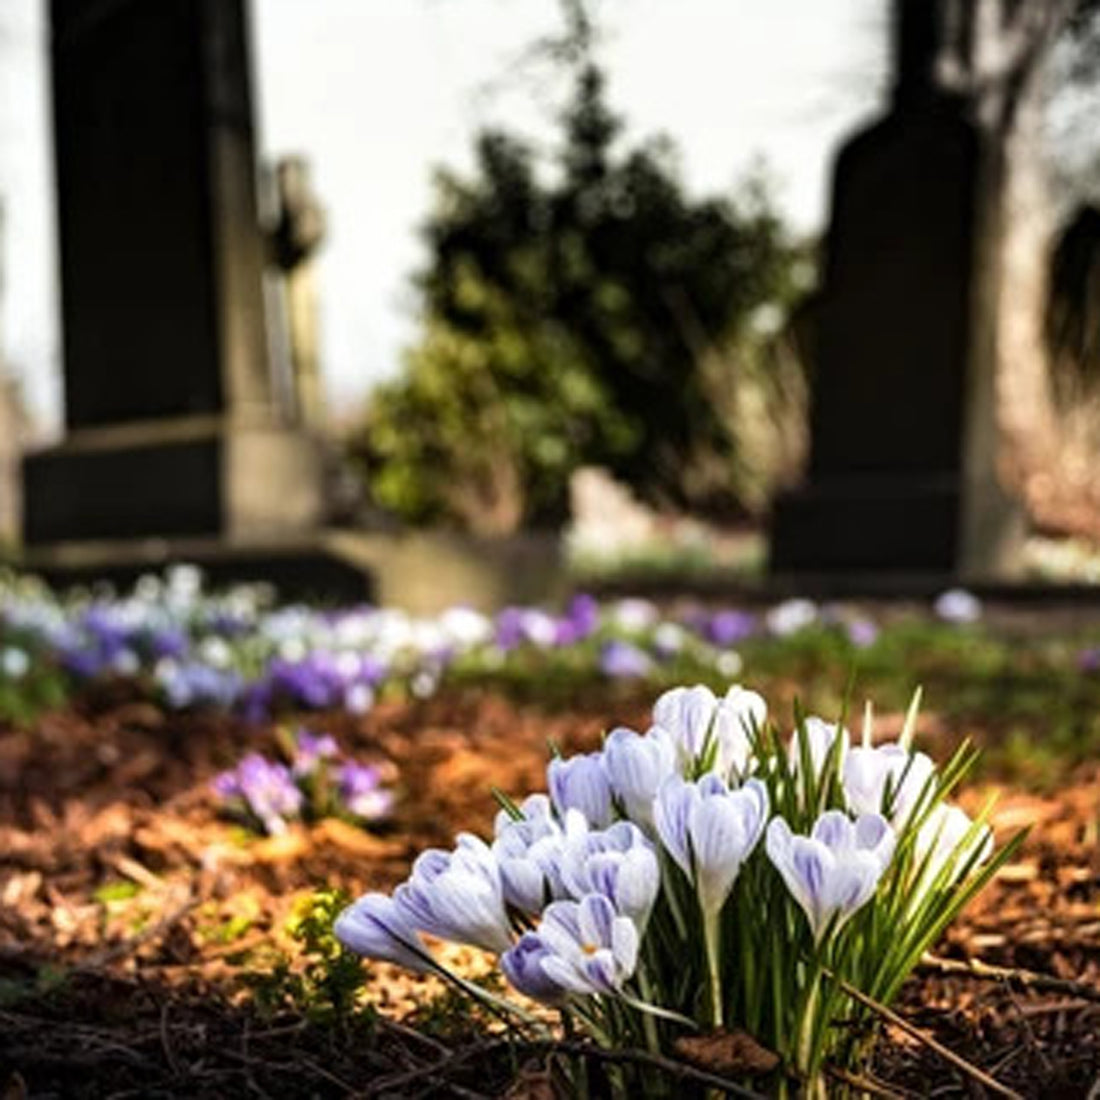 How To Choose A Cemetery For A Final Resting Place